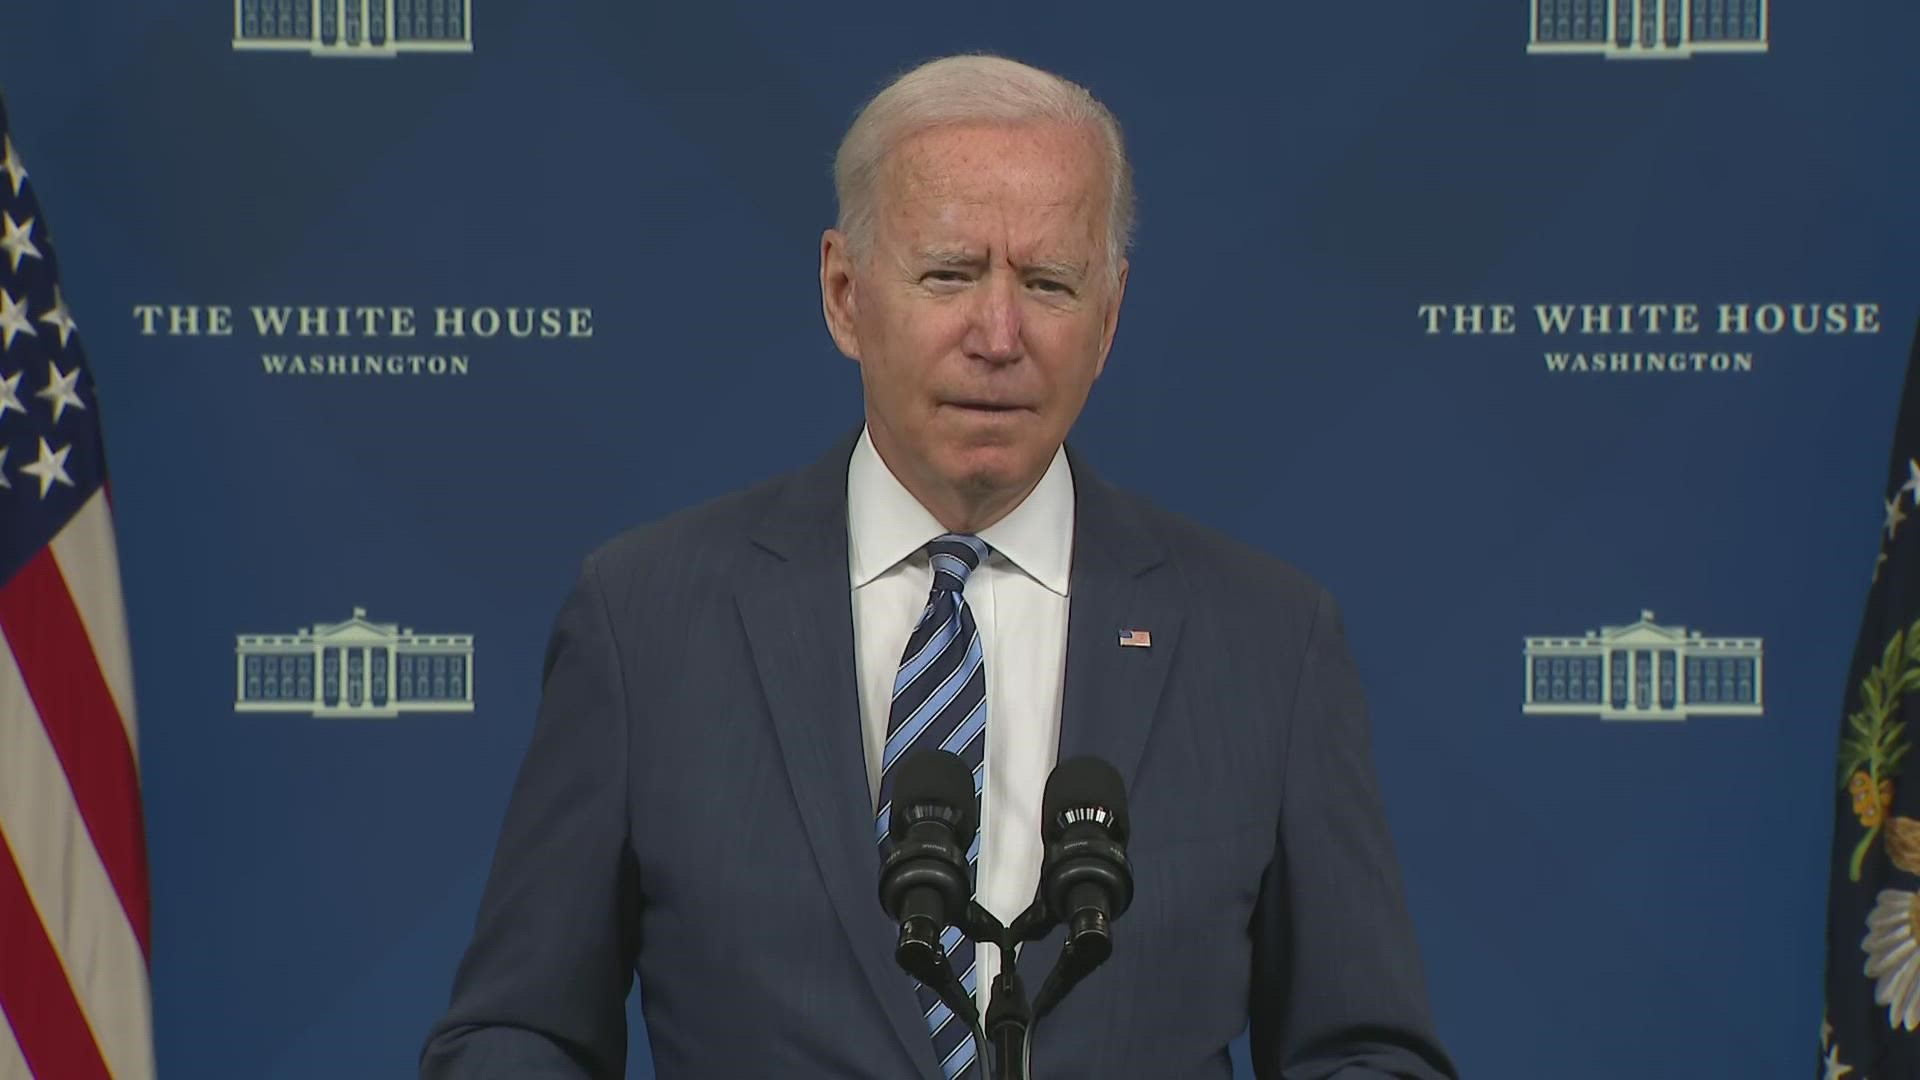 President Biden delivered remarks on his administration’s plan to respond to the aftermath of Hurricane Ida and ongoing wildfires.